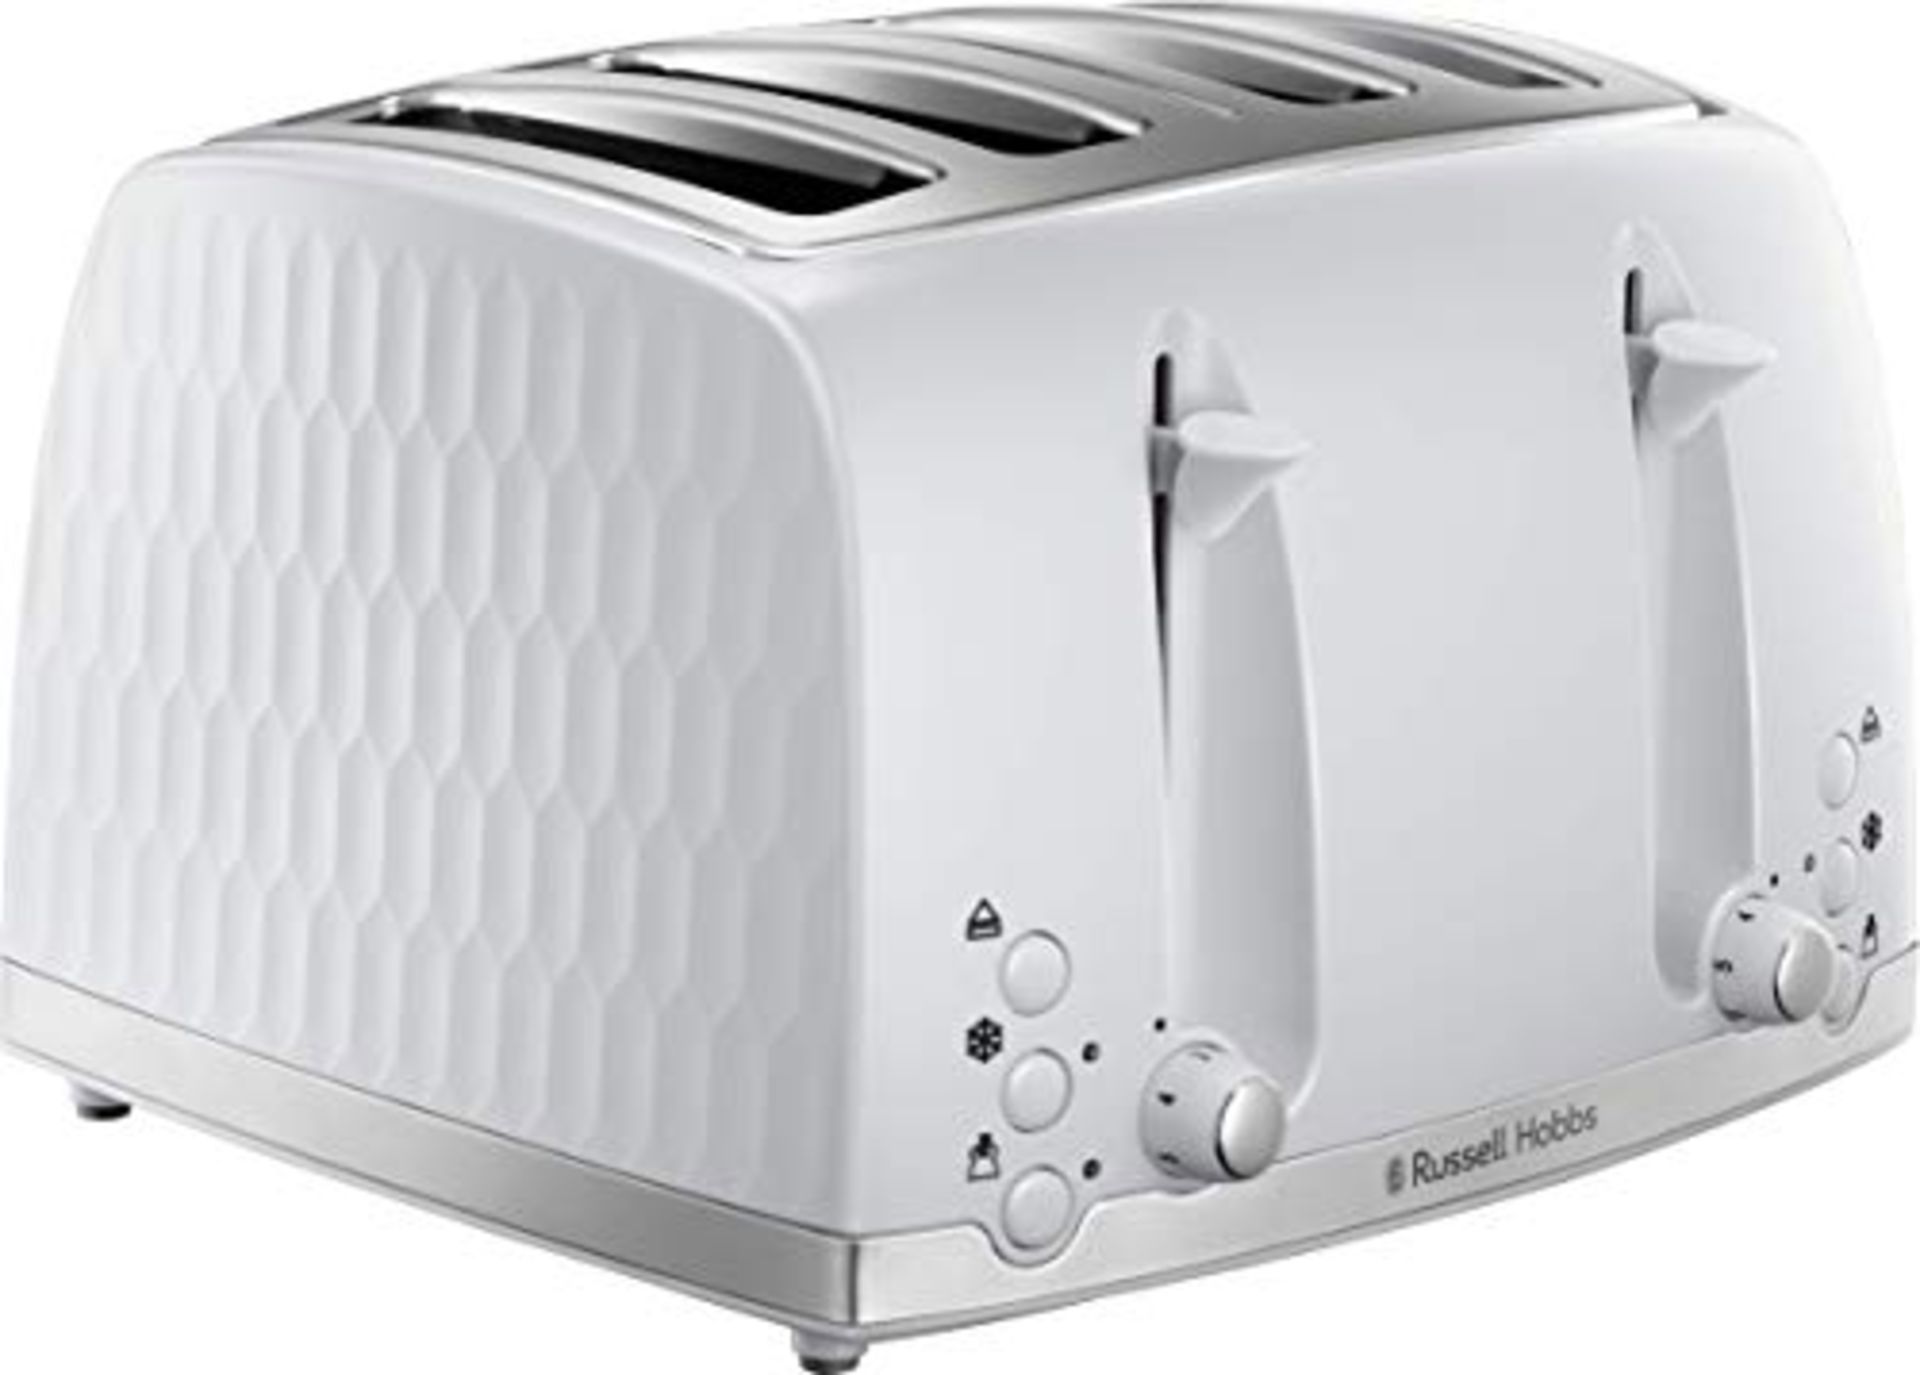 Russell Hobbs 26070 4 Slice Toaster - Contemporary Honeycomb Design with Extra Wide Sl